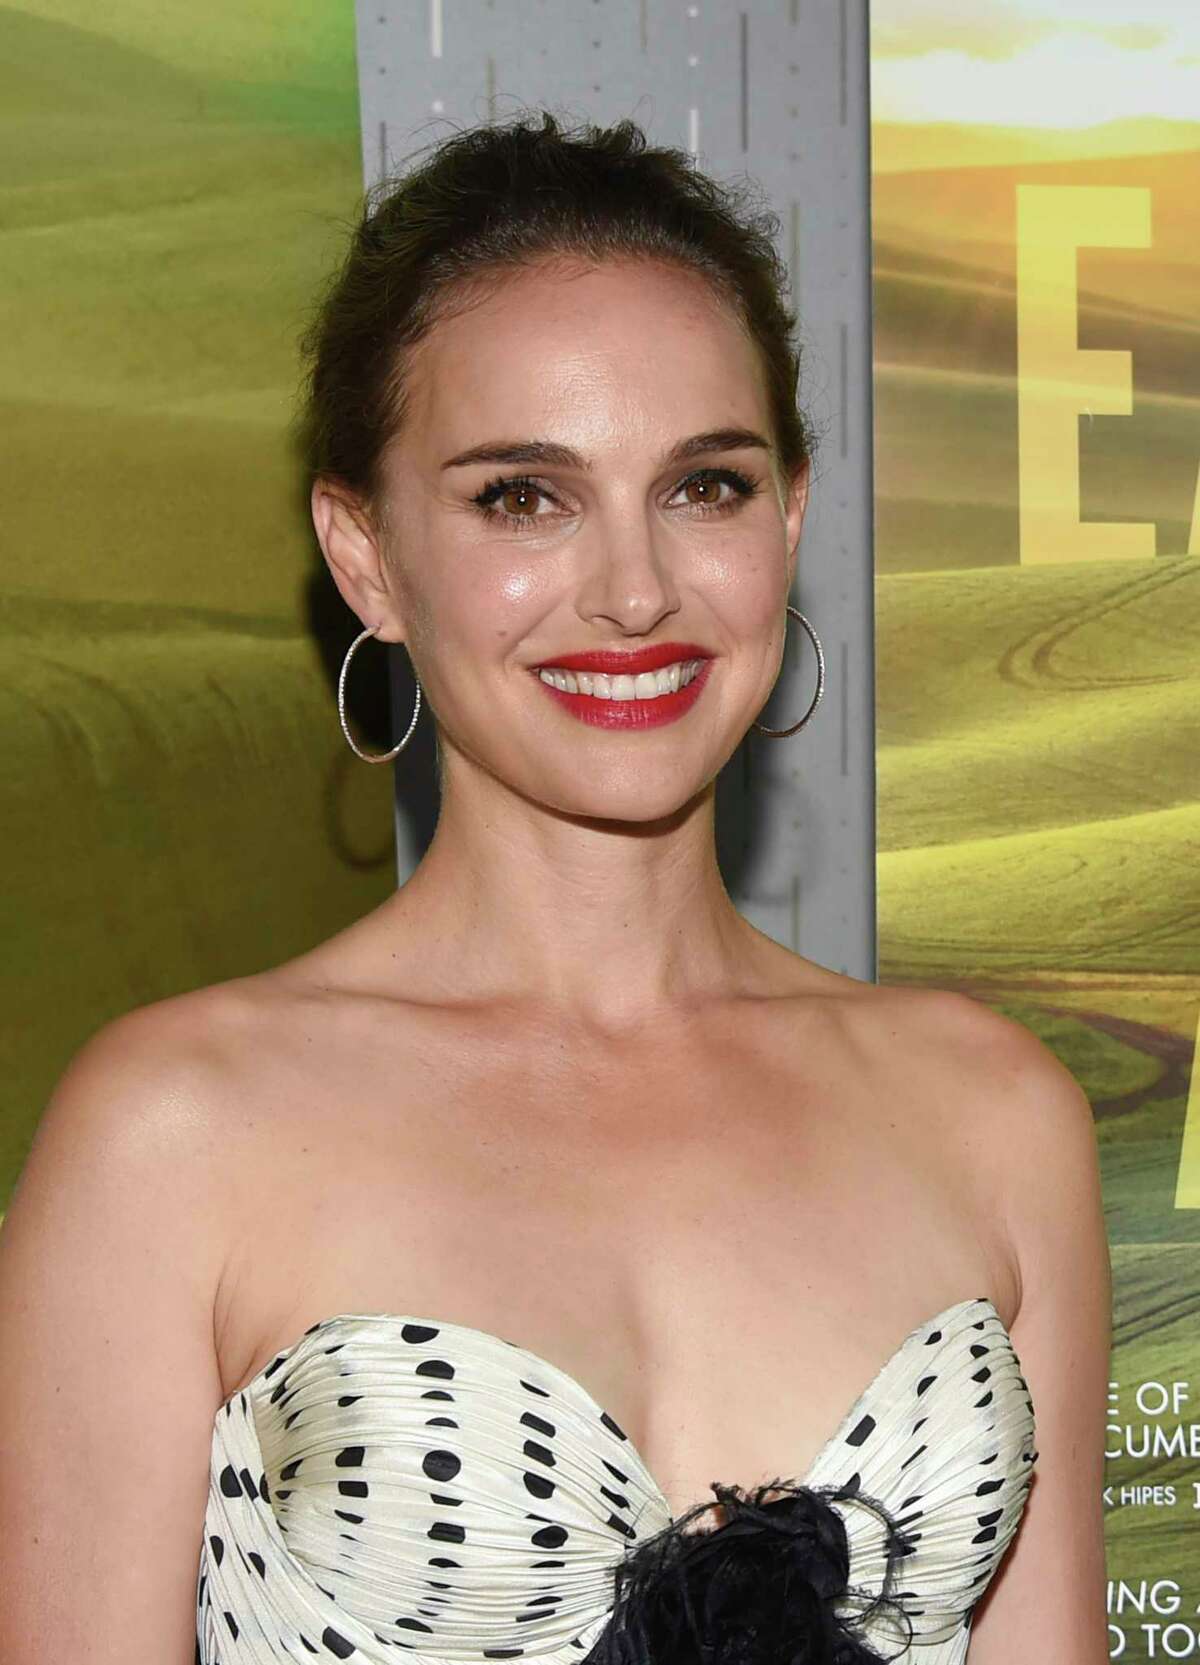 Producer Natalie Portman attends a special screening of "Eating Animals" at the IFC Center on Thursday, June 14, 2018, in New York. (Photo by Evan Agostini/Invision/AP)